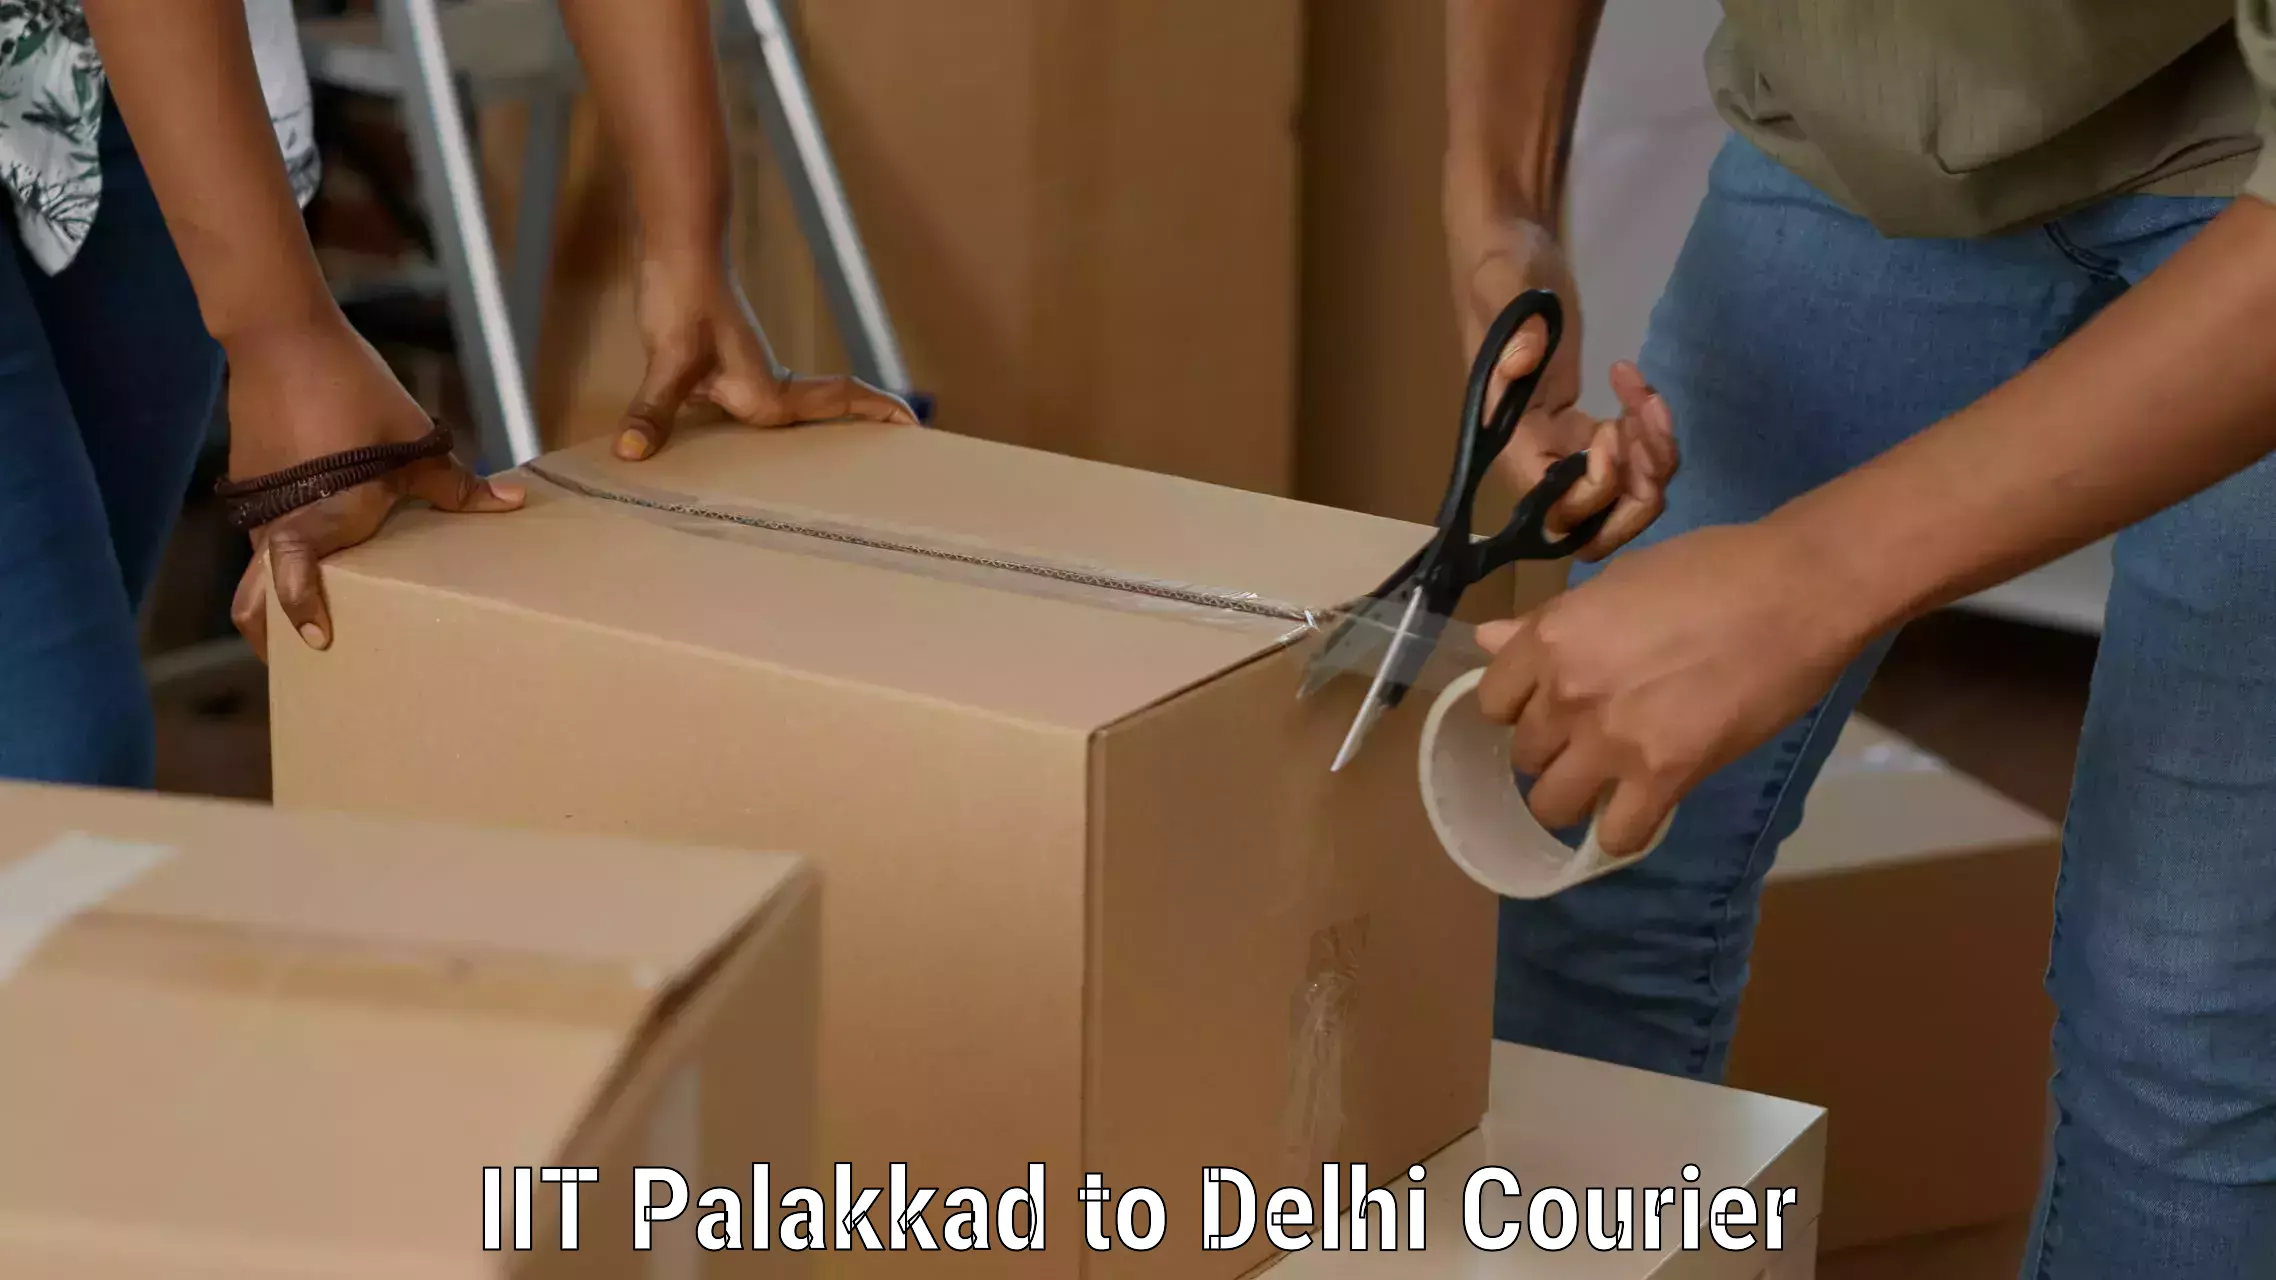 Expedited parcel delivery IIT Palakkad to NCR